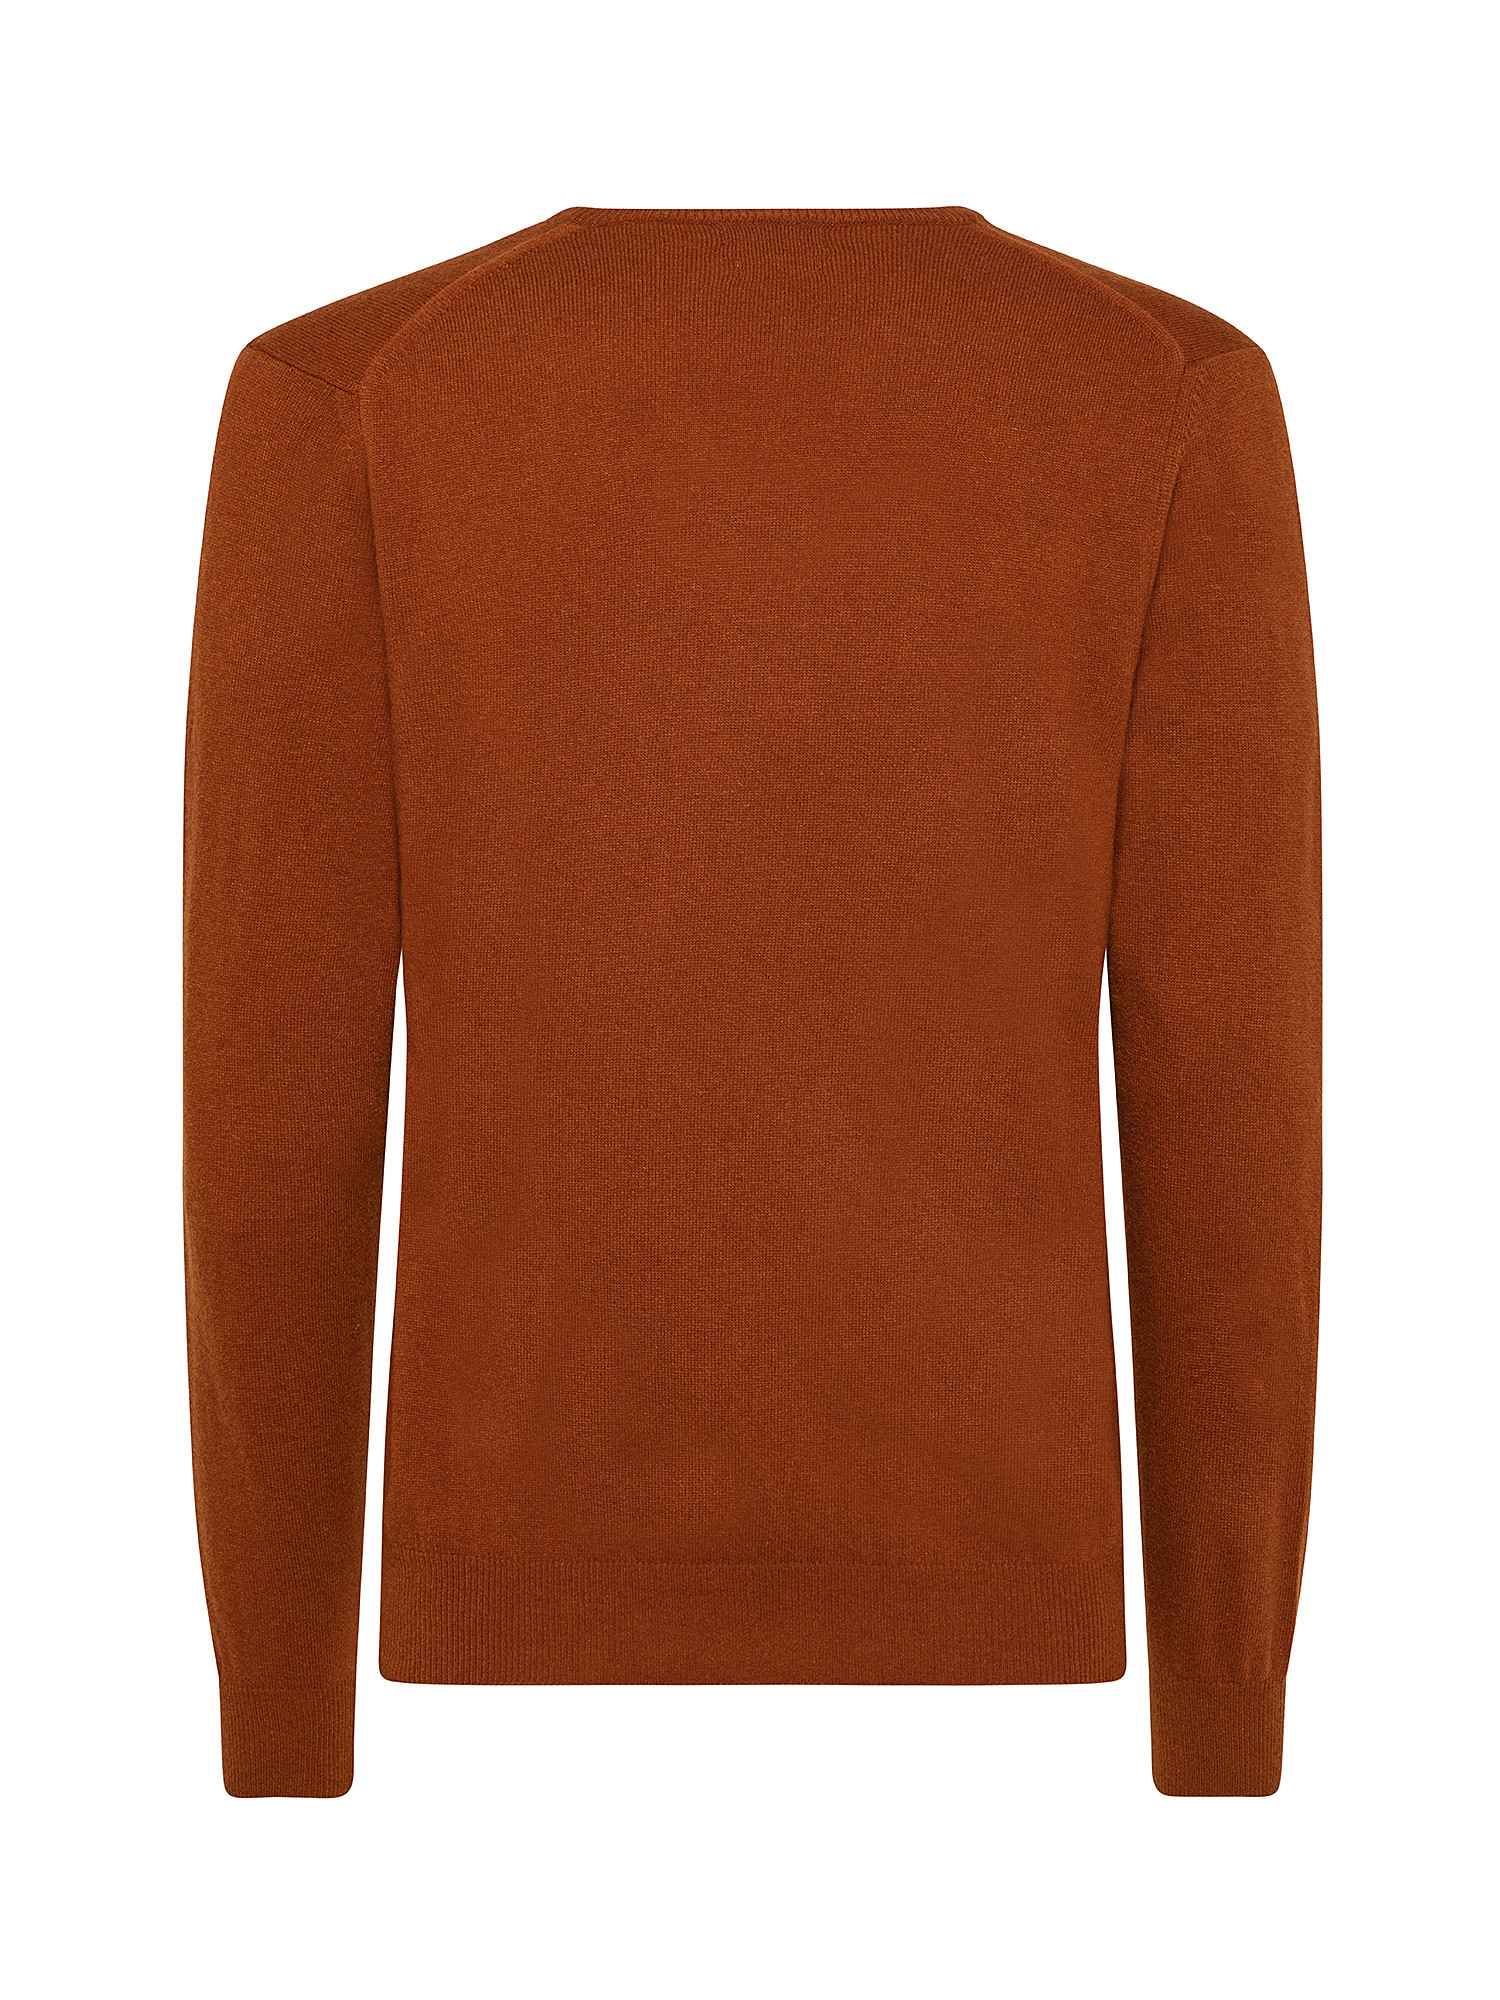 Cashmere Blend V-neck sweater with noble fibers, Copper Brown, large image number 1